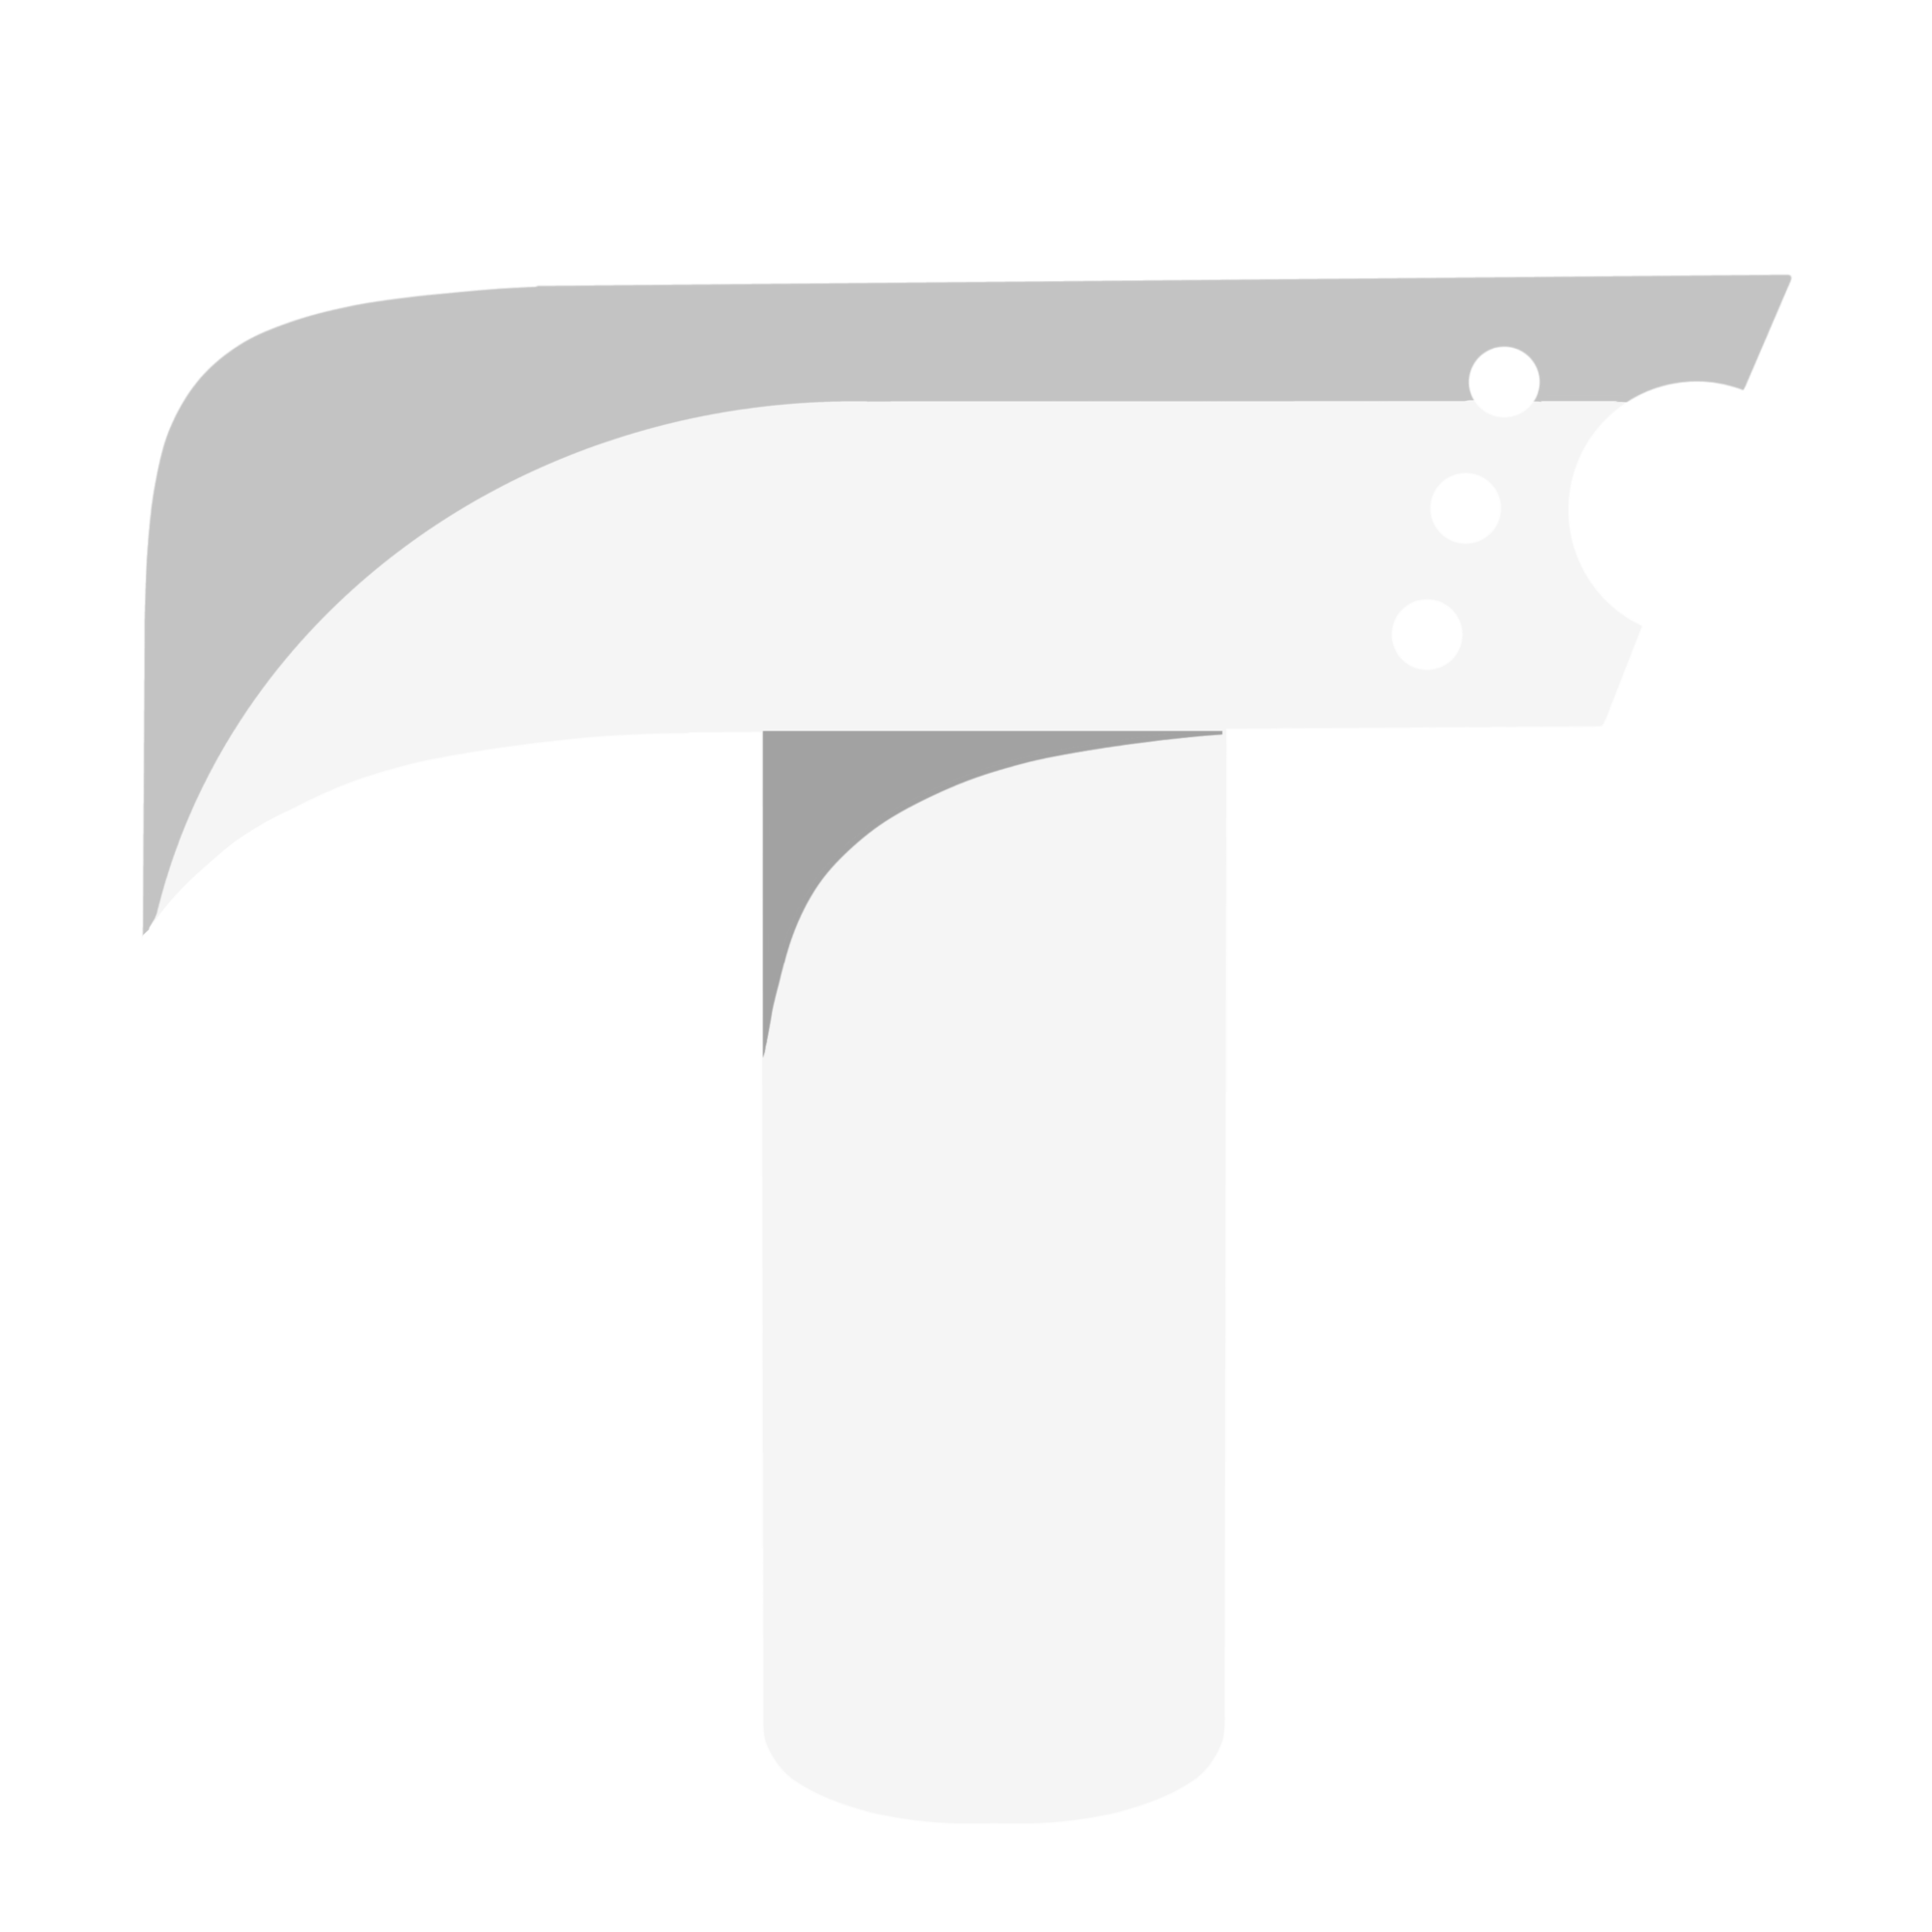 The logo of tickety